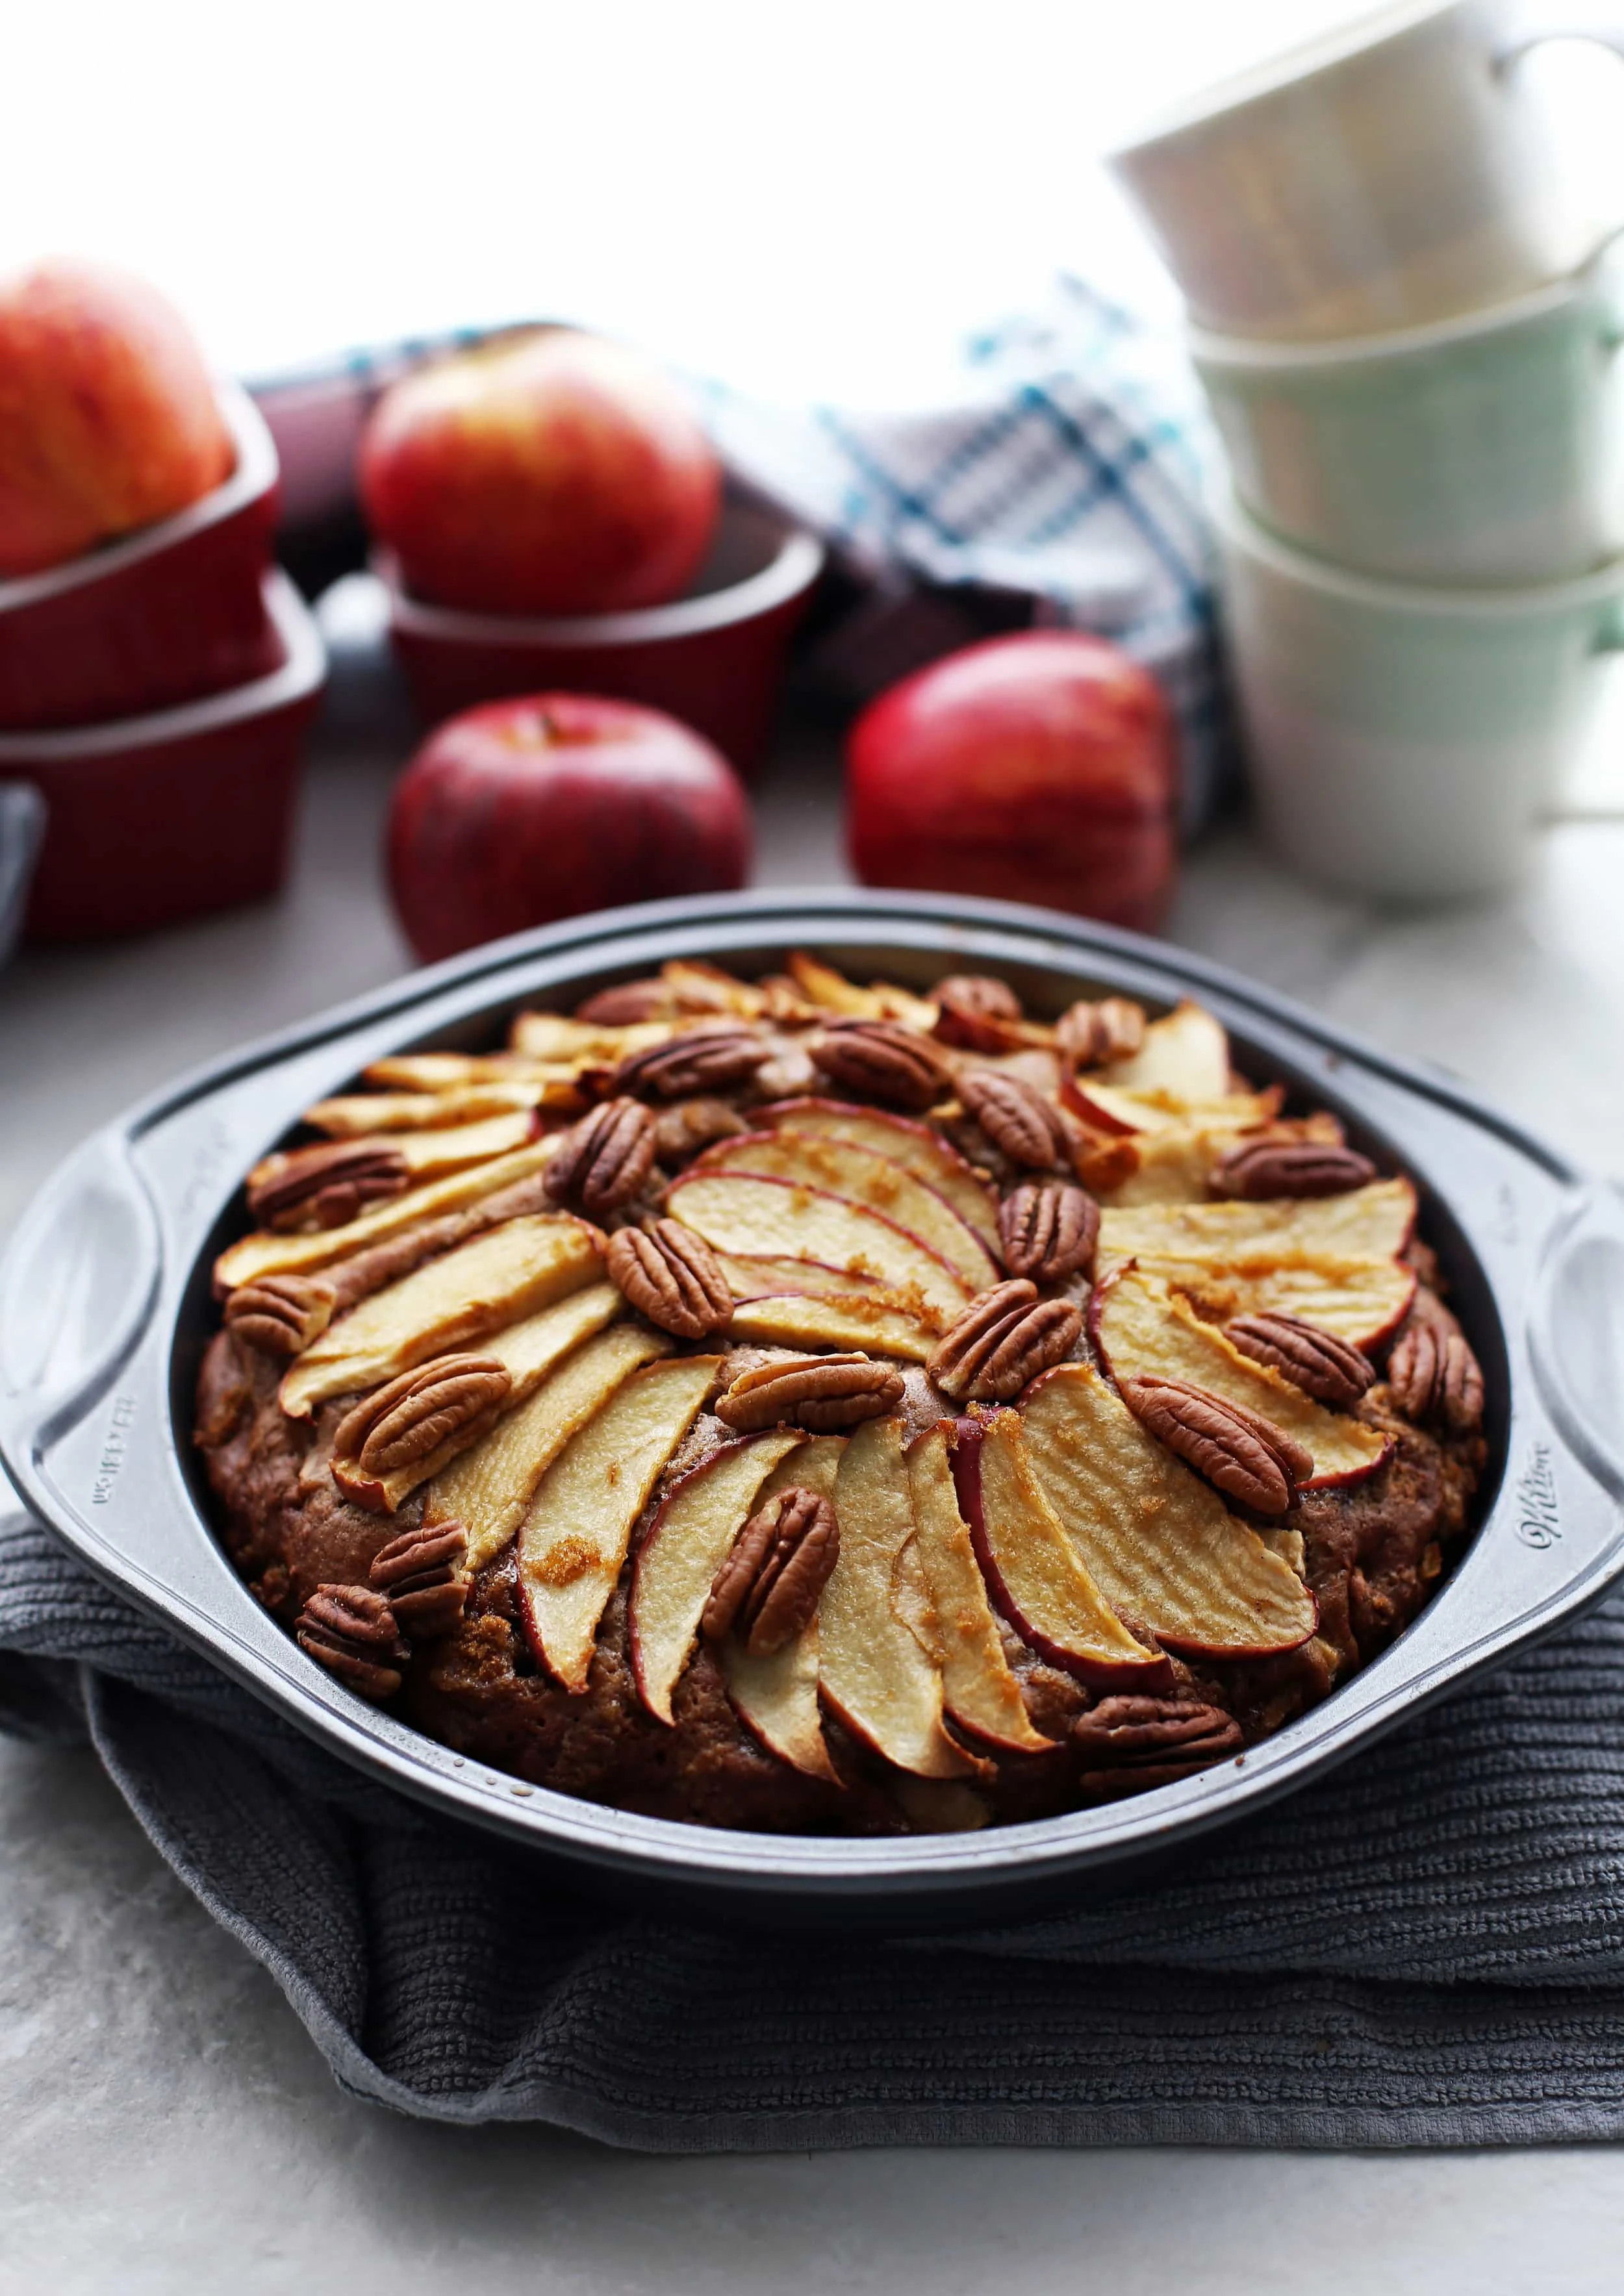 Baked apple cinnamon pecan cake with apple slices and pecans on top in a round cake pan.